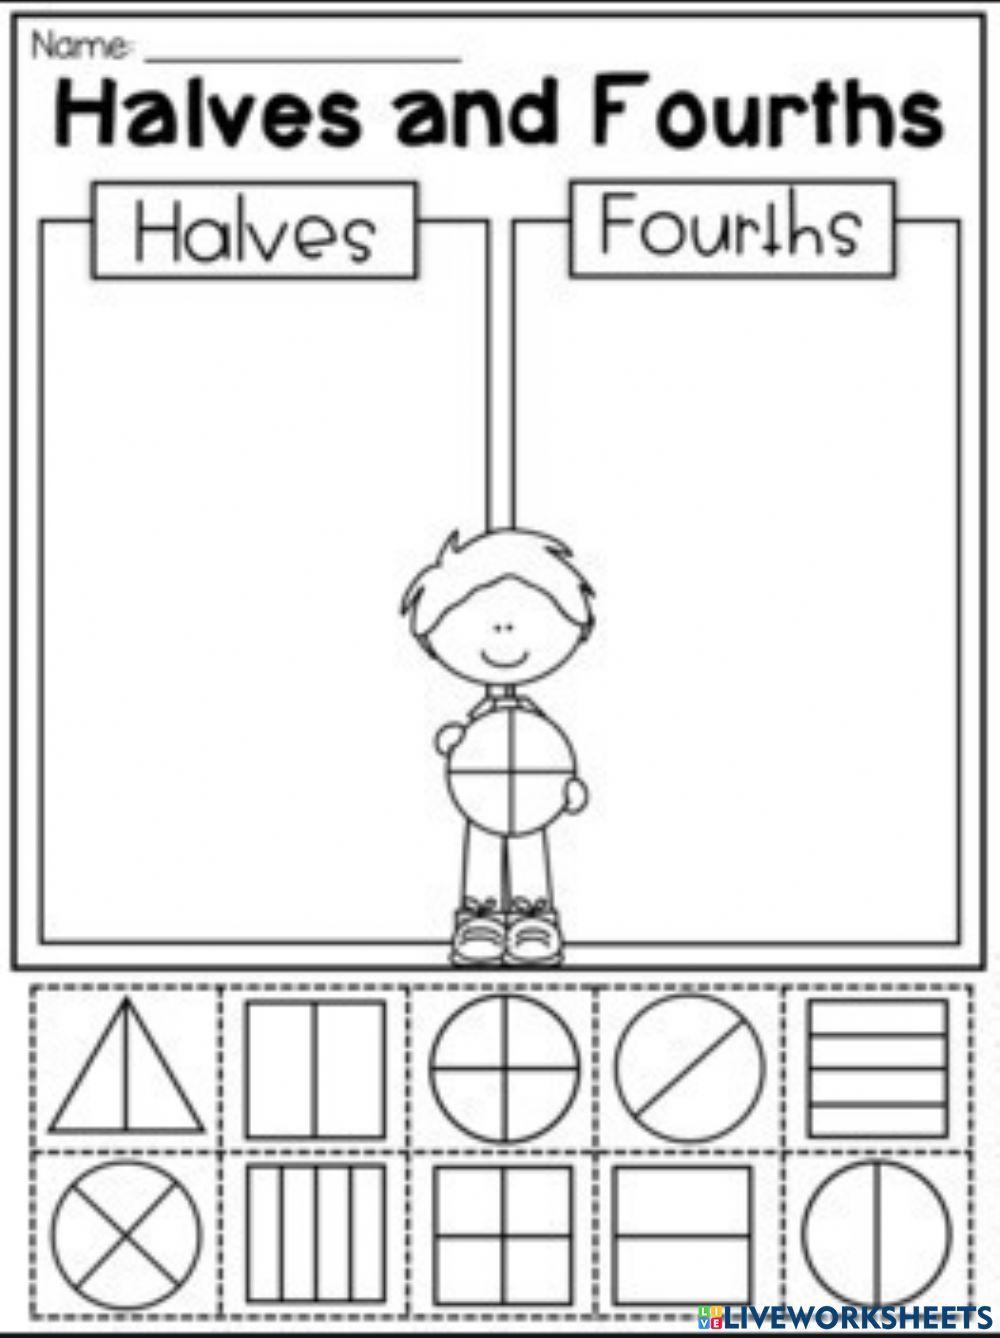 Halves and Fourths